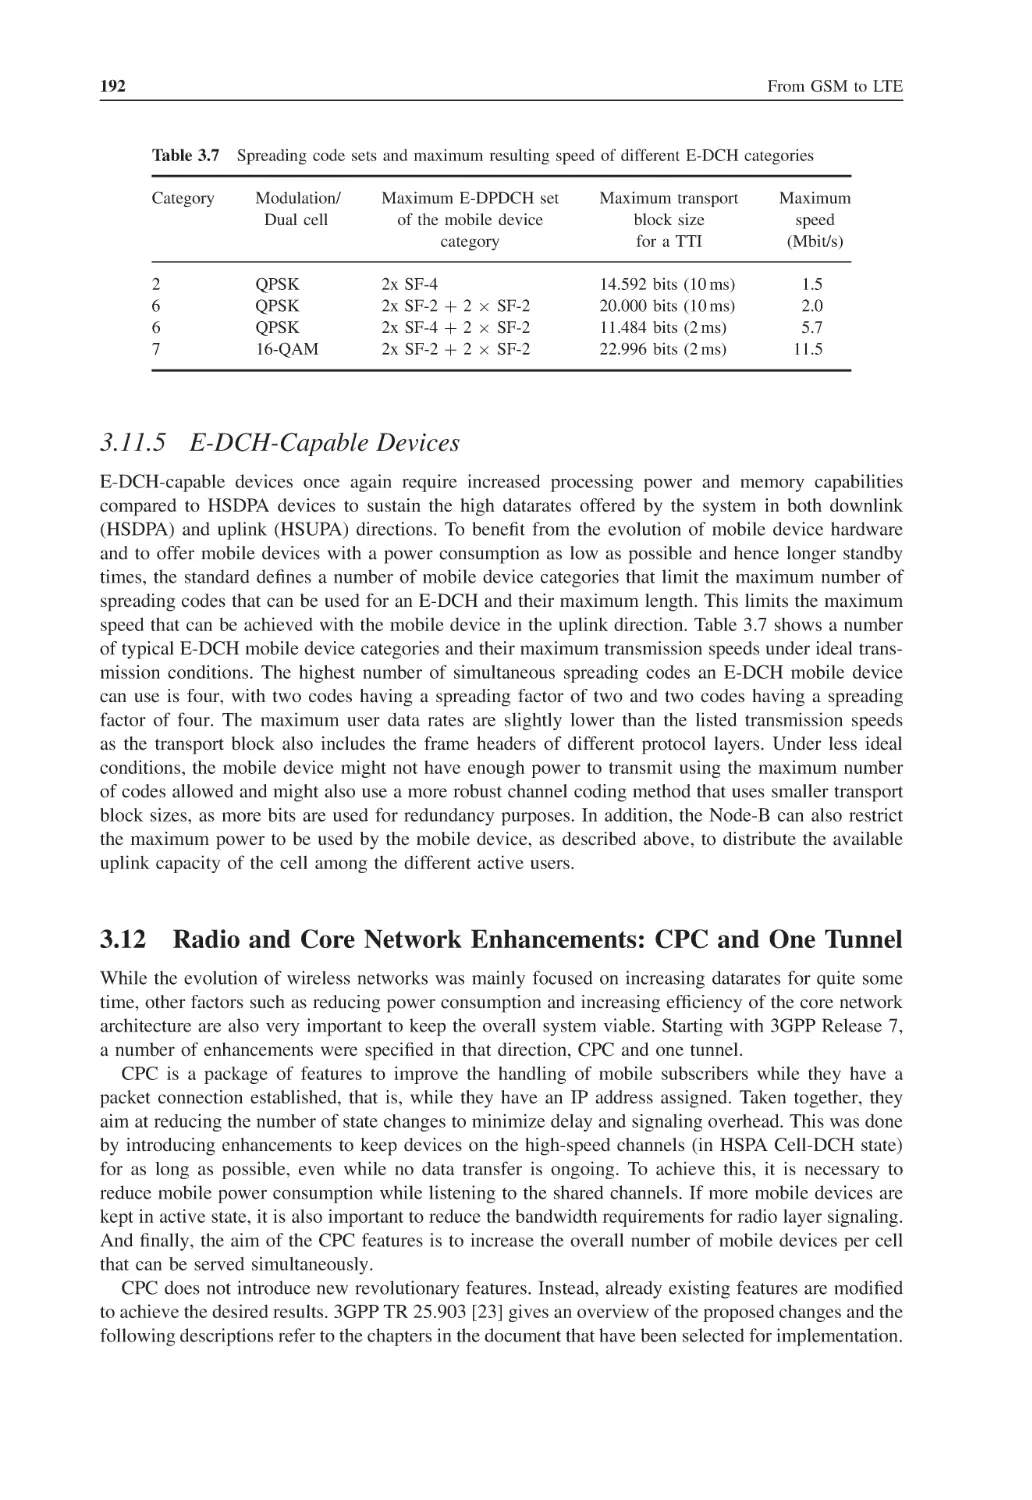 3.11.5 E-DCH-Capable Devices
3.12 Radio and Core Network Enhancements